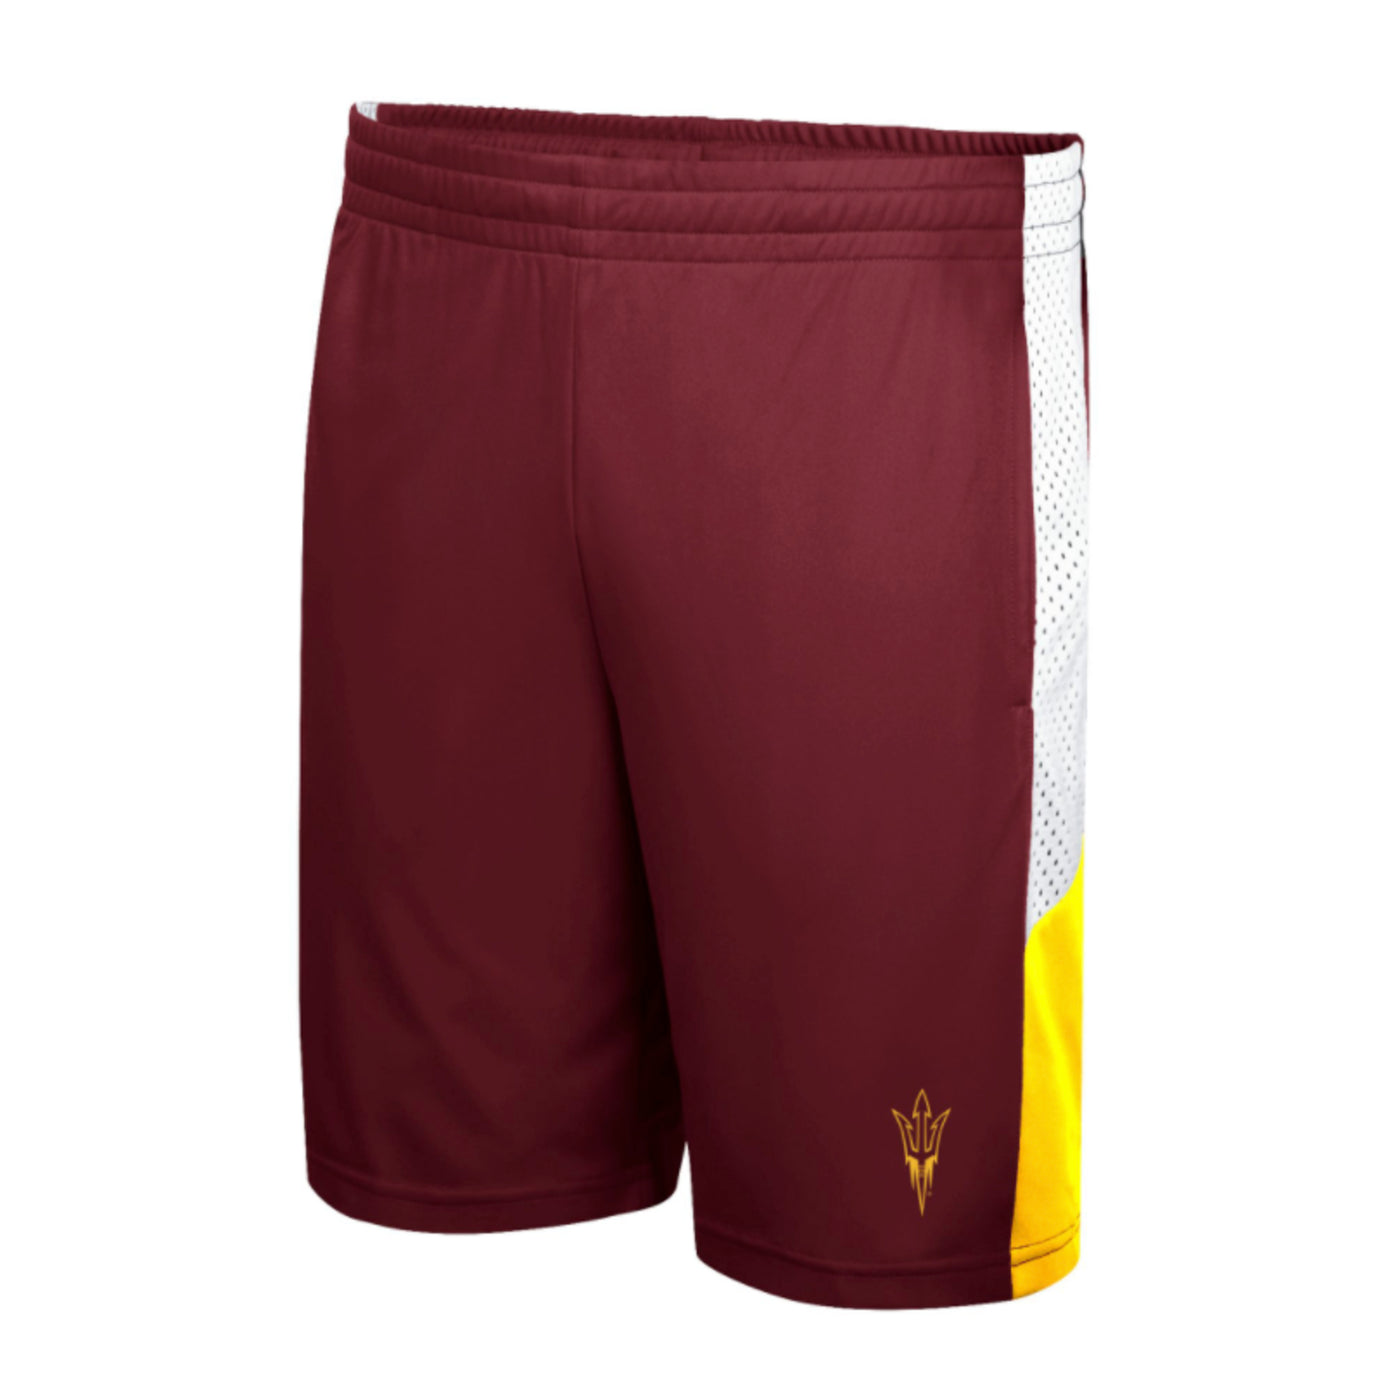 ASU Maroon mens shorts with white mesh side pannel with yellow bottom and pitchfork outline on bottom left leg